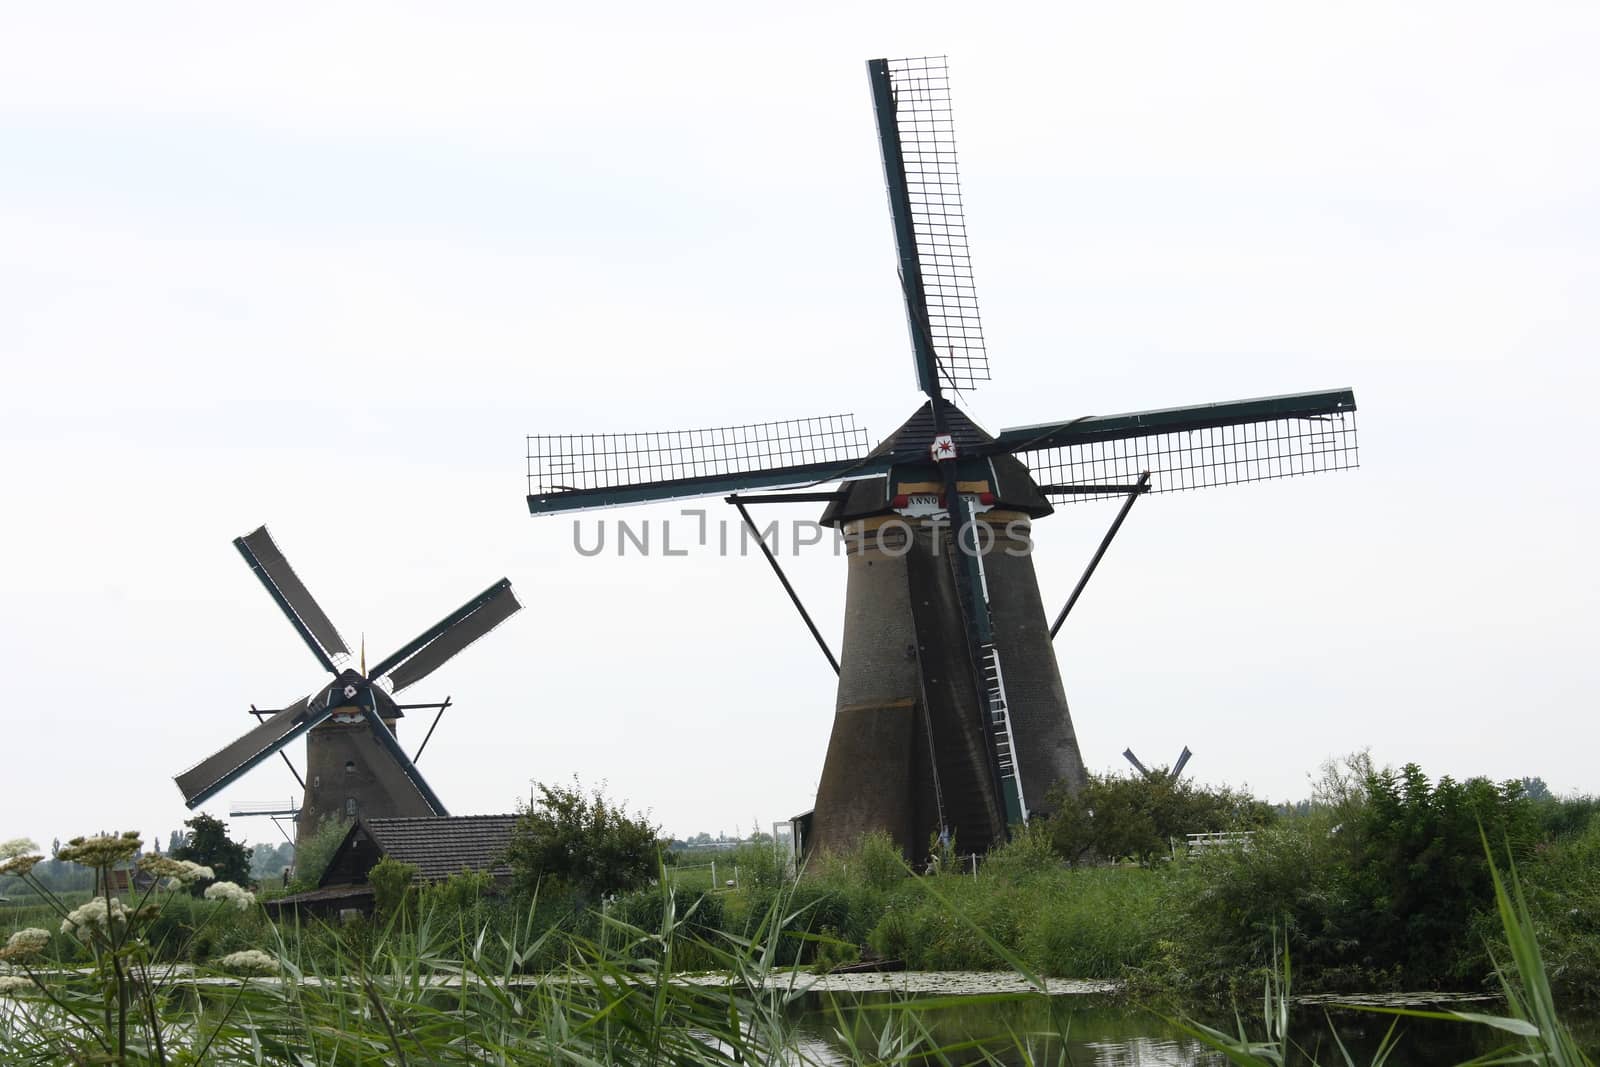 A beautiful, old, historic windmill, with four wings 